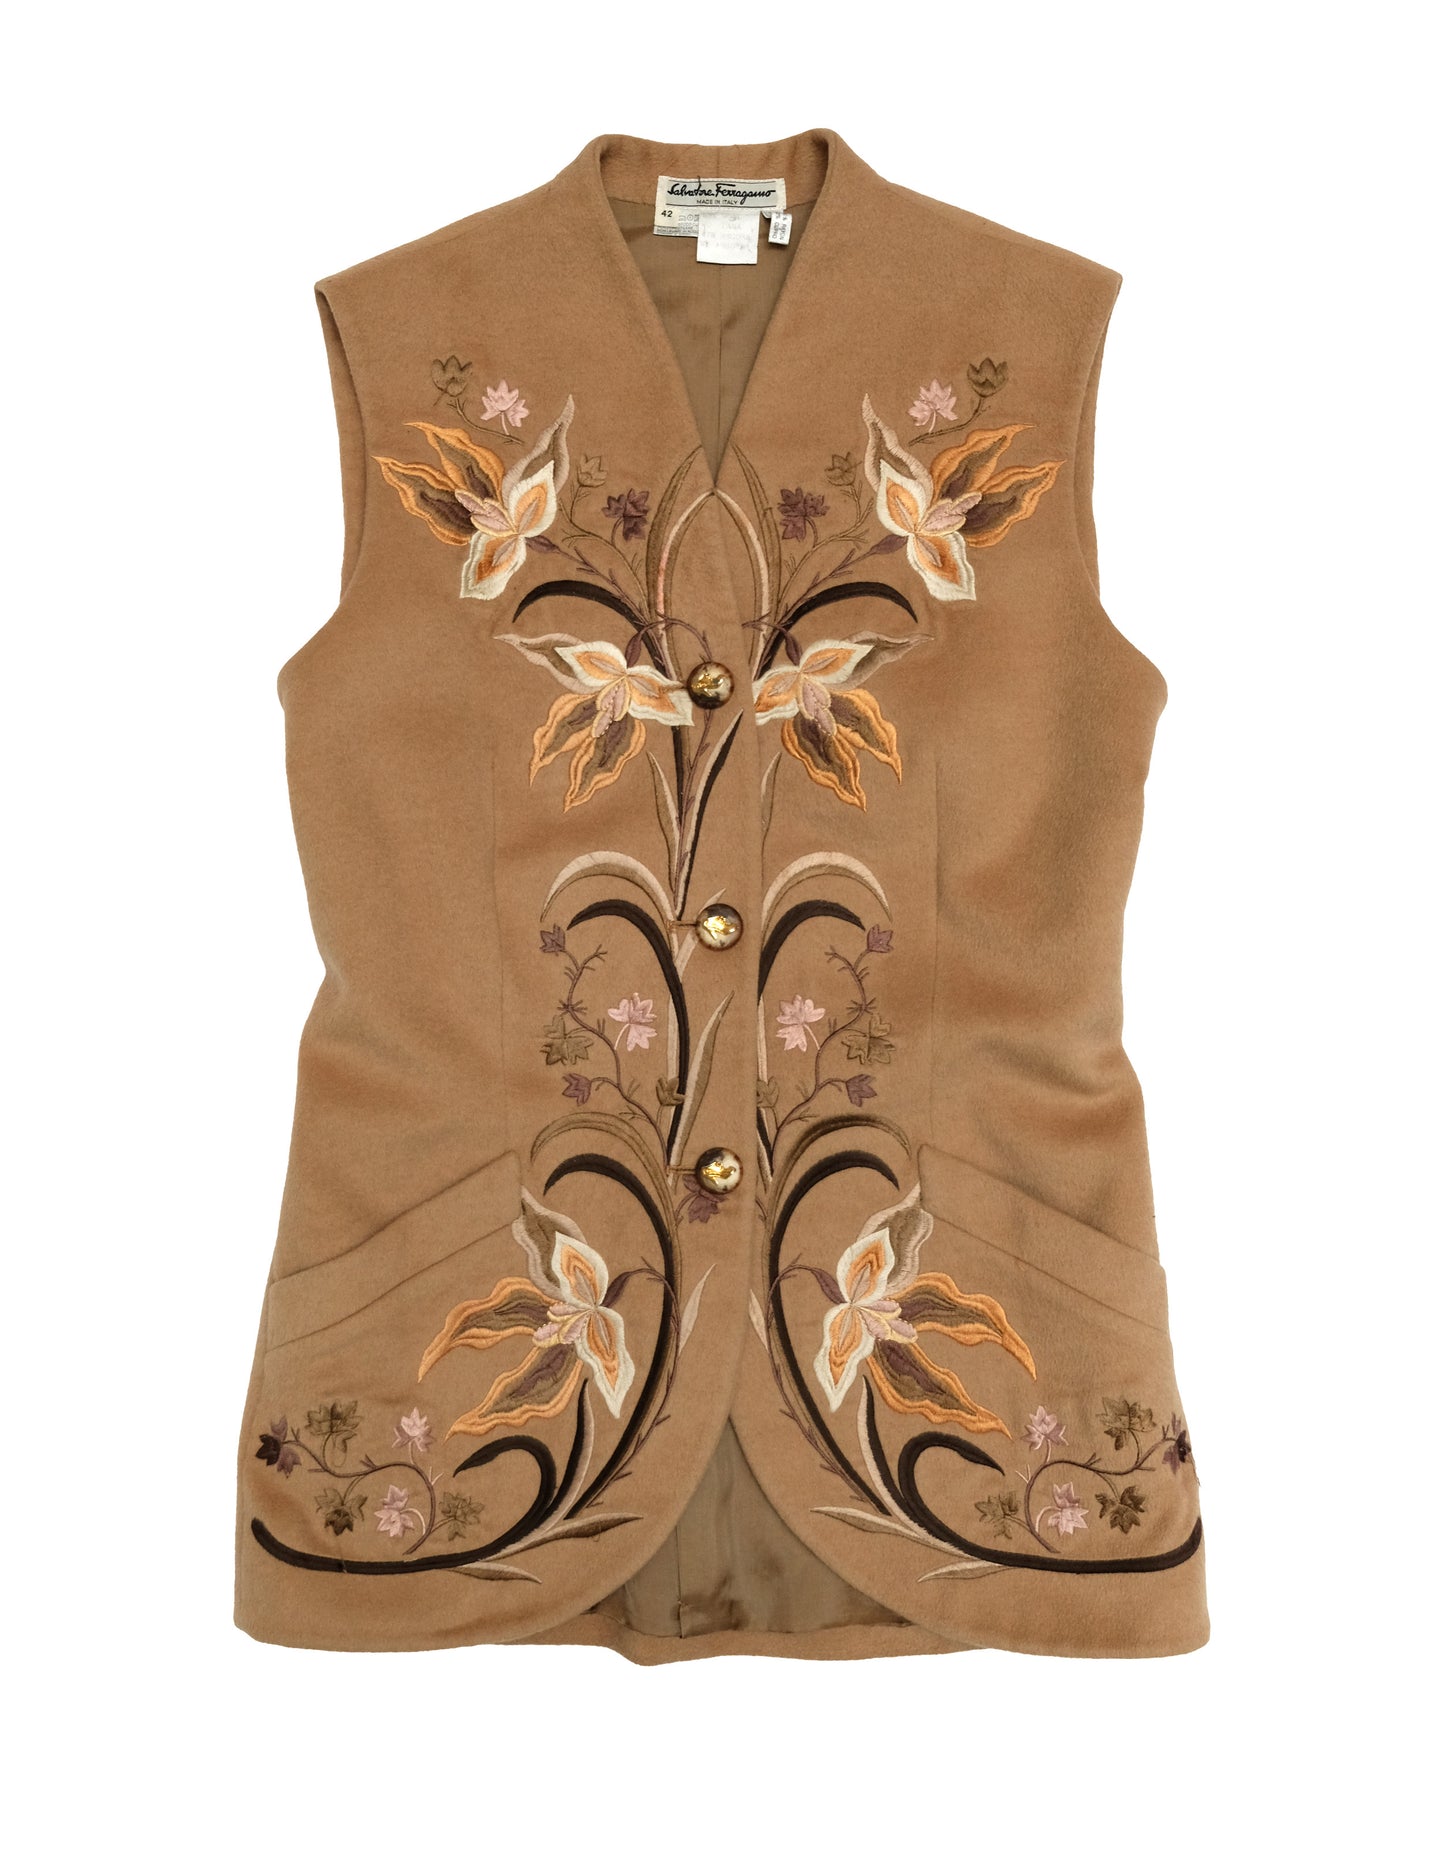 Salvatore Ferragamo Vintage Camel Waistcoat with Embroidered Flowers, UK10